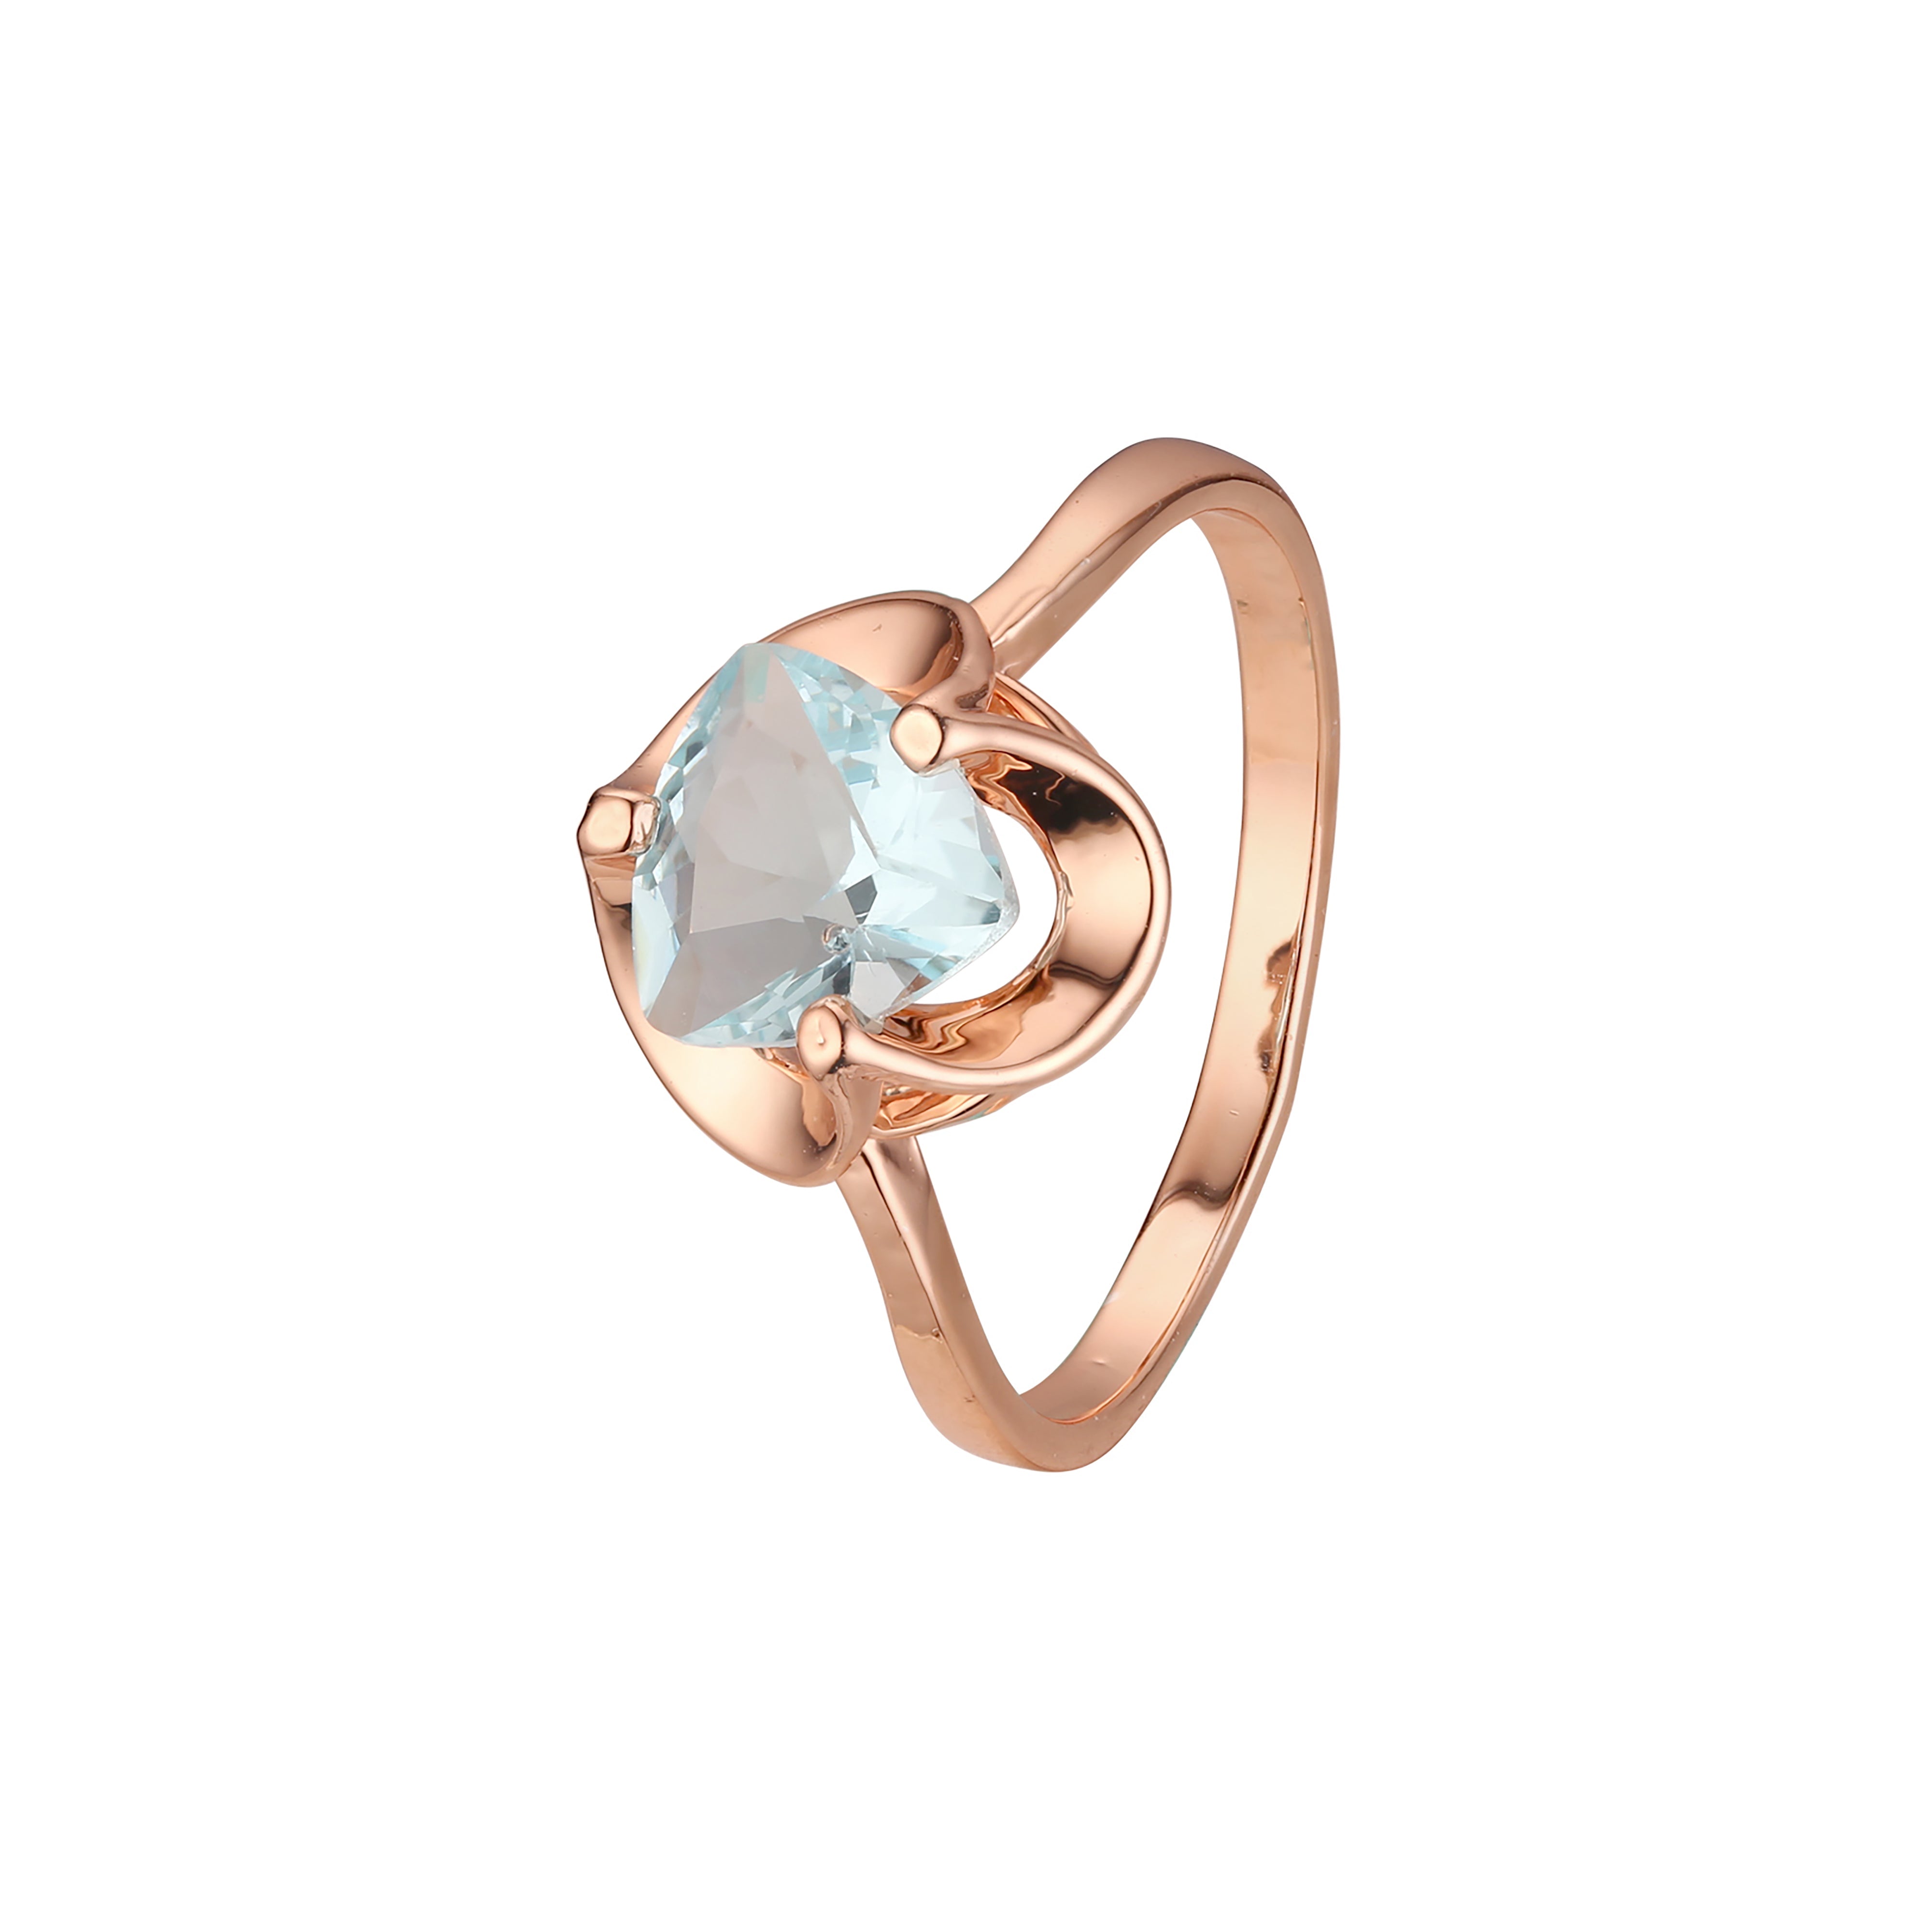 Solitaire triangle stone rings in 14K Gold, Rose Gold plating colors